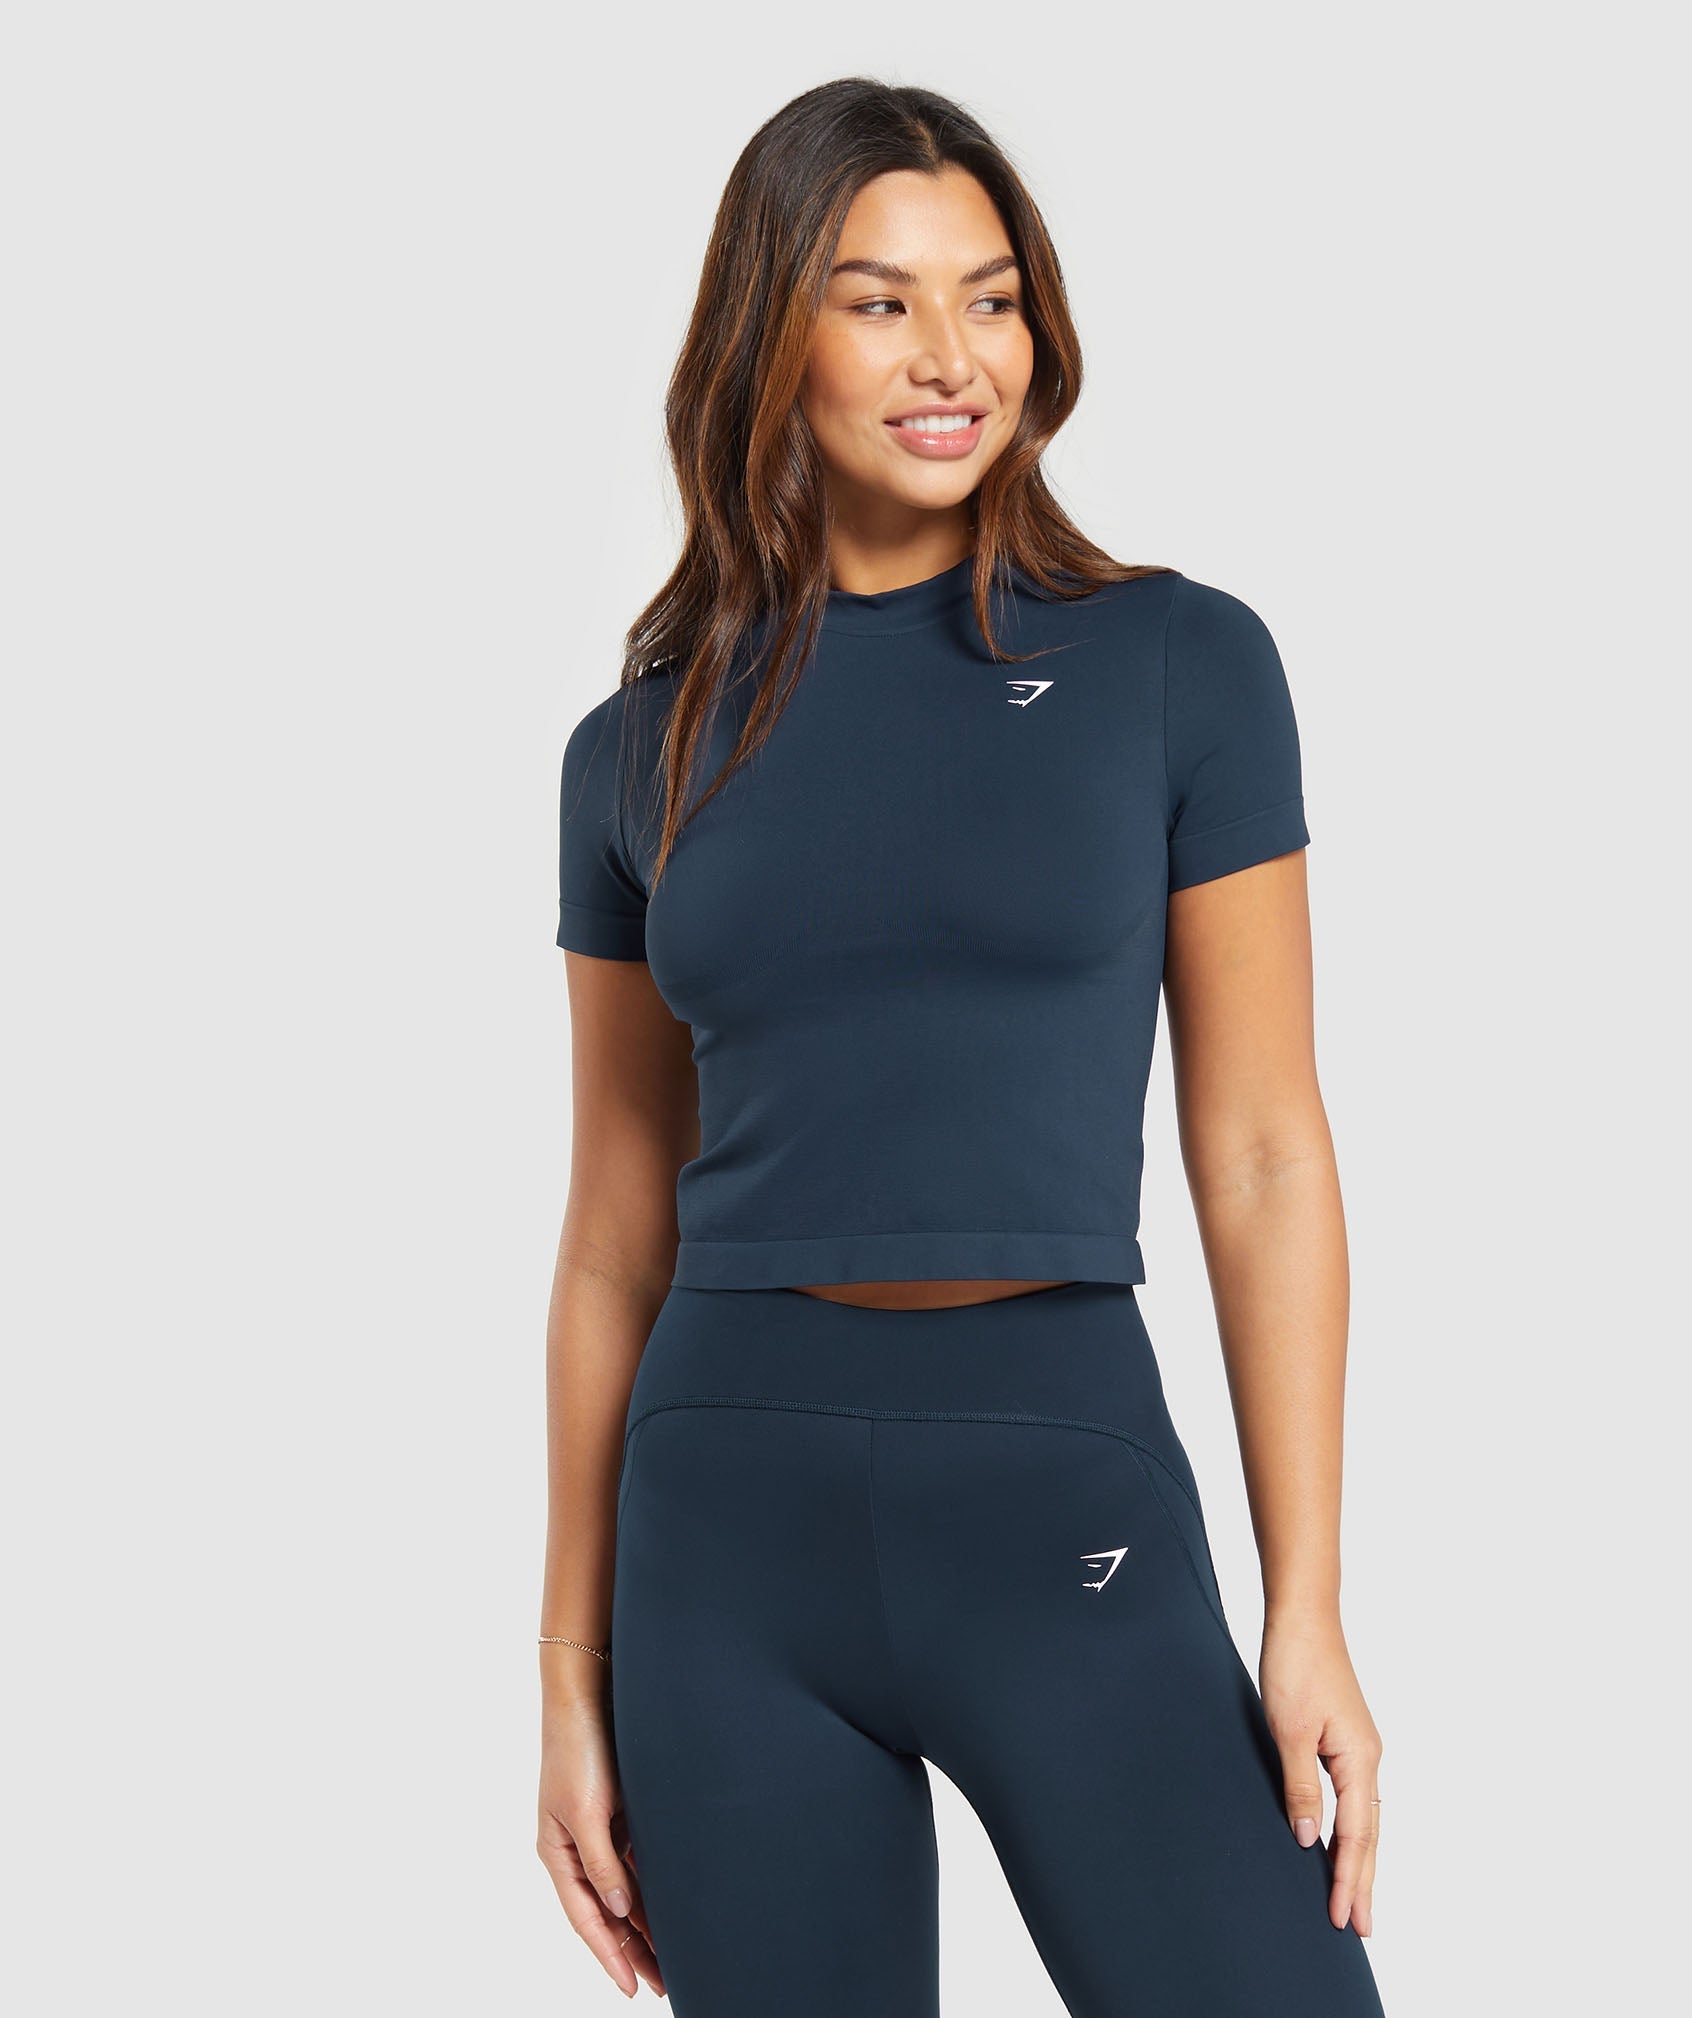 Everyday Seamless Tight Fit Tee in Navy - view 1